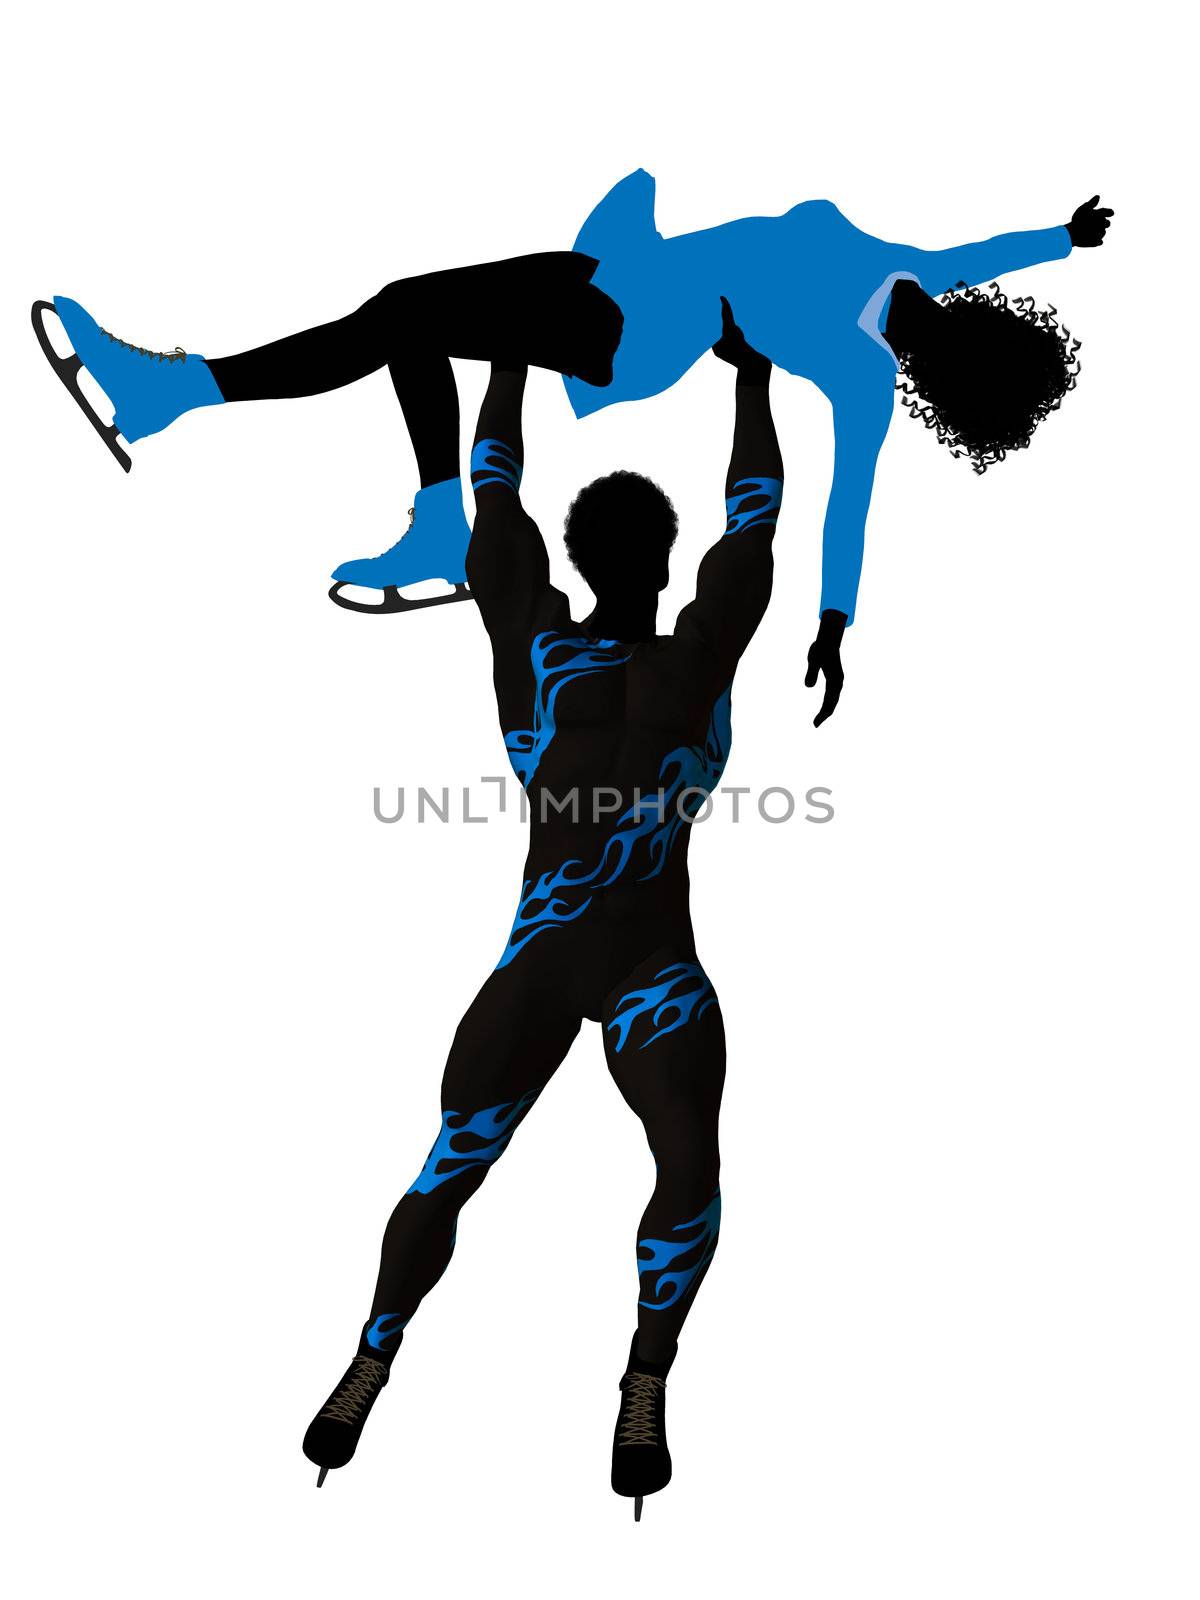 African american couple ice skating illustration silhouette on a white background